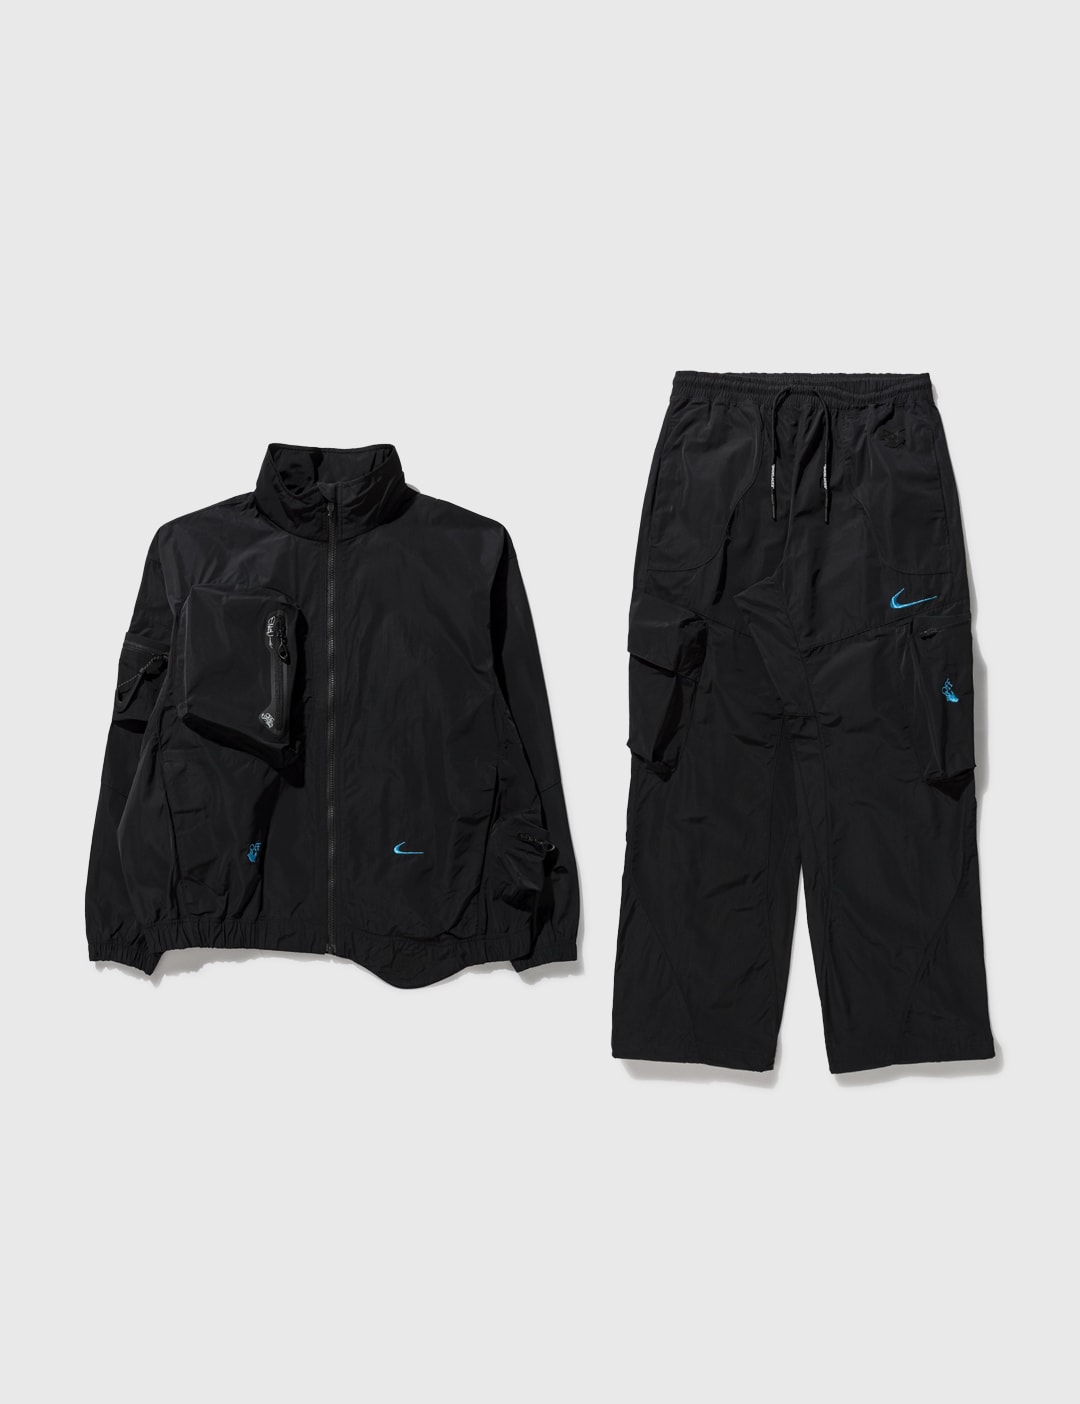 construcción naval Tropical estoy enfermo Nike - Nike x Off-White™ NRG Tracksuit | HBX - Globally Curated Fashion and  Lifestyle by Hypebeast